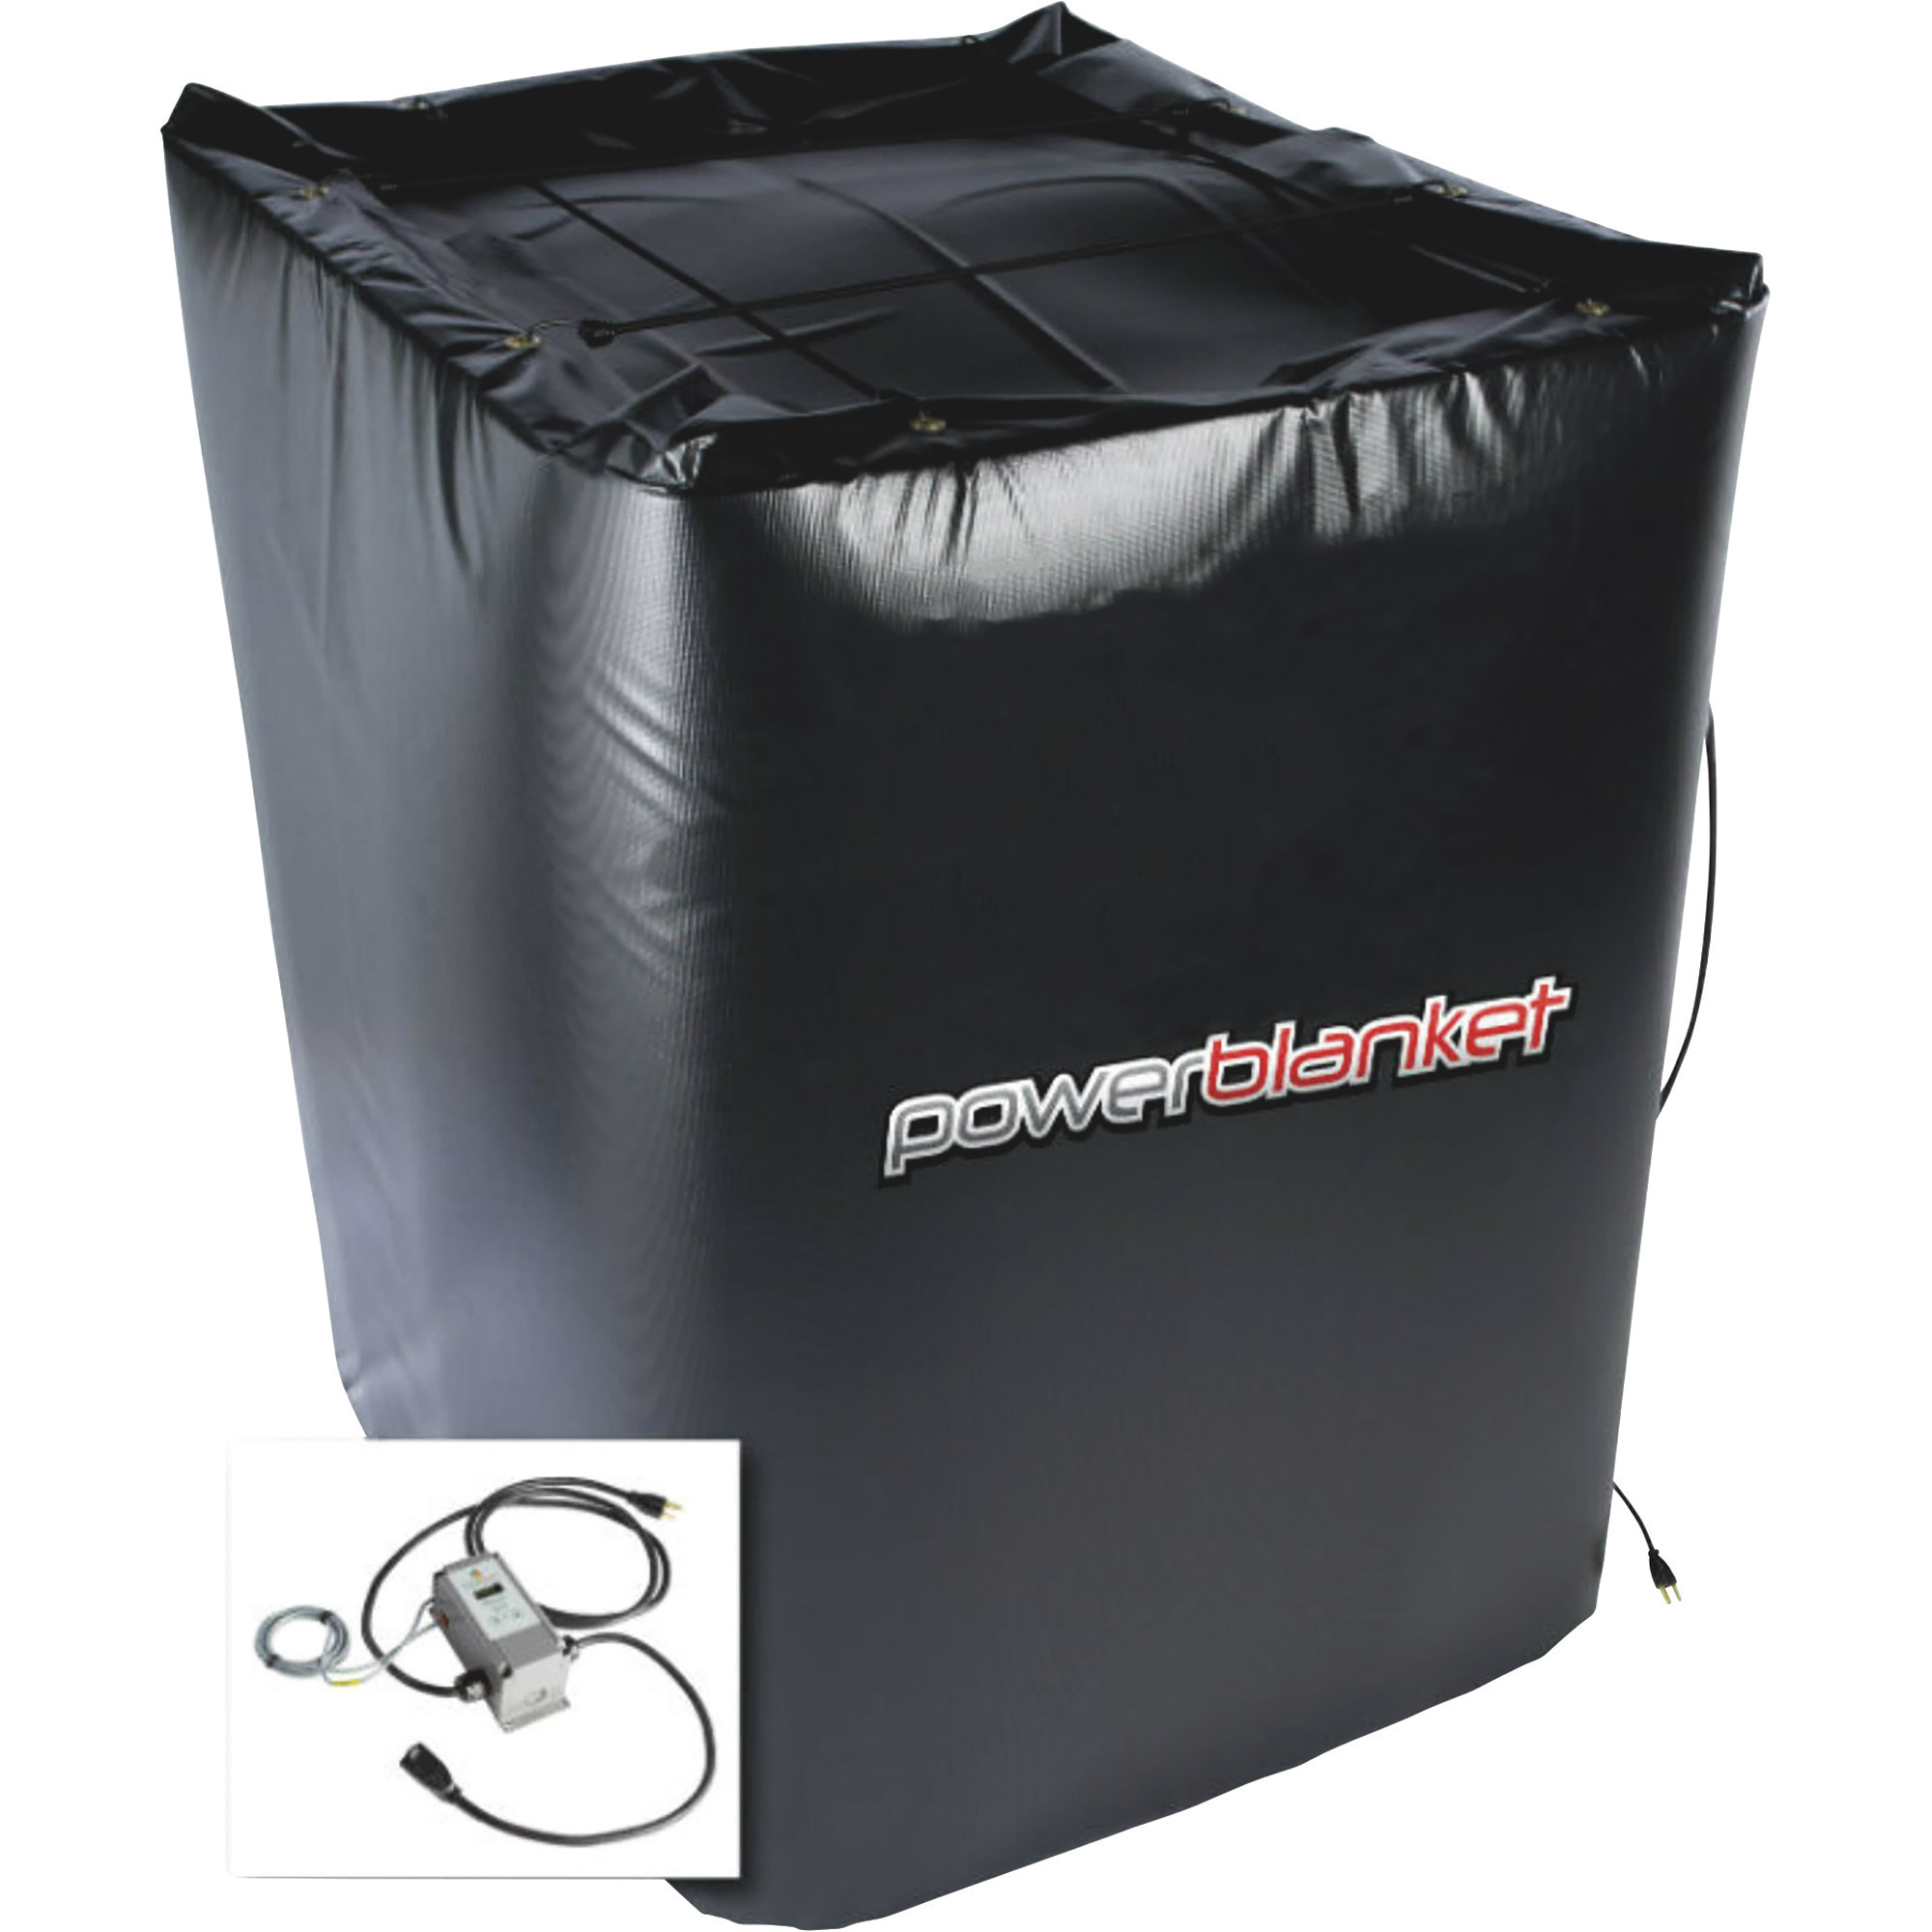 Powerblanket Insulated IBC Tote Heater with Digital Thermostat, 250-Gallon Capacity, 1033 Watts, 120 Volts, Model TH250